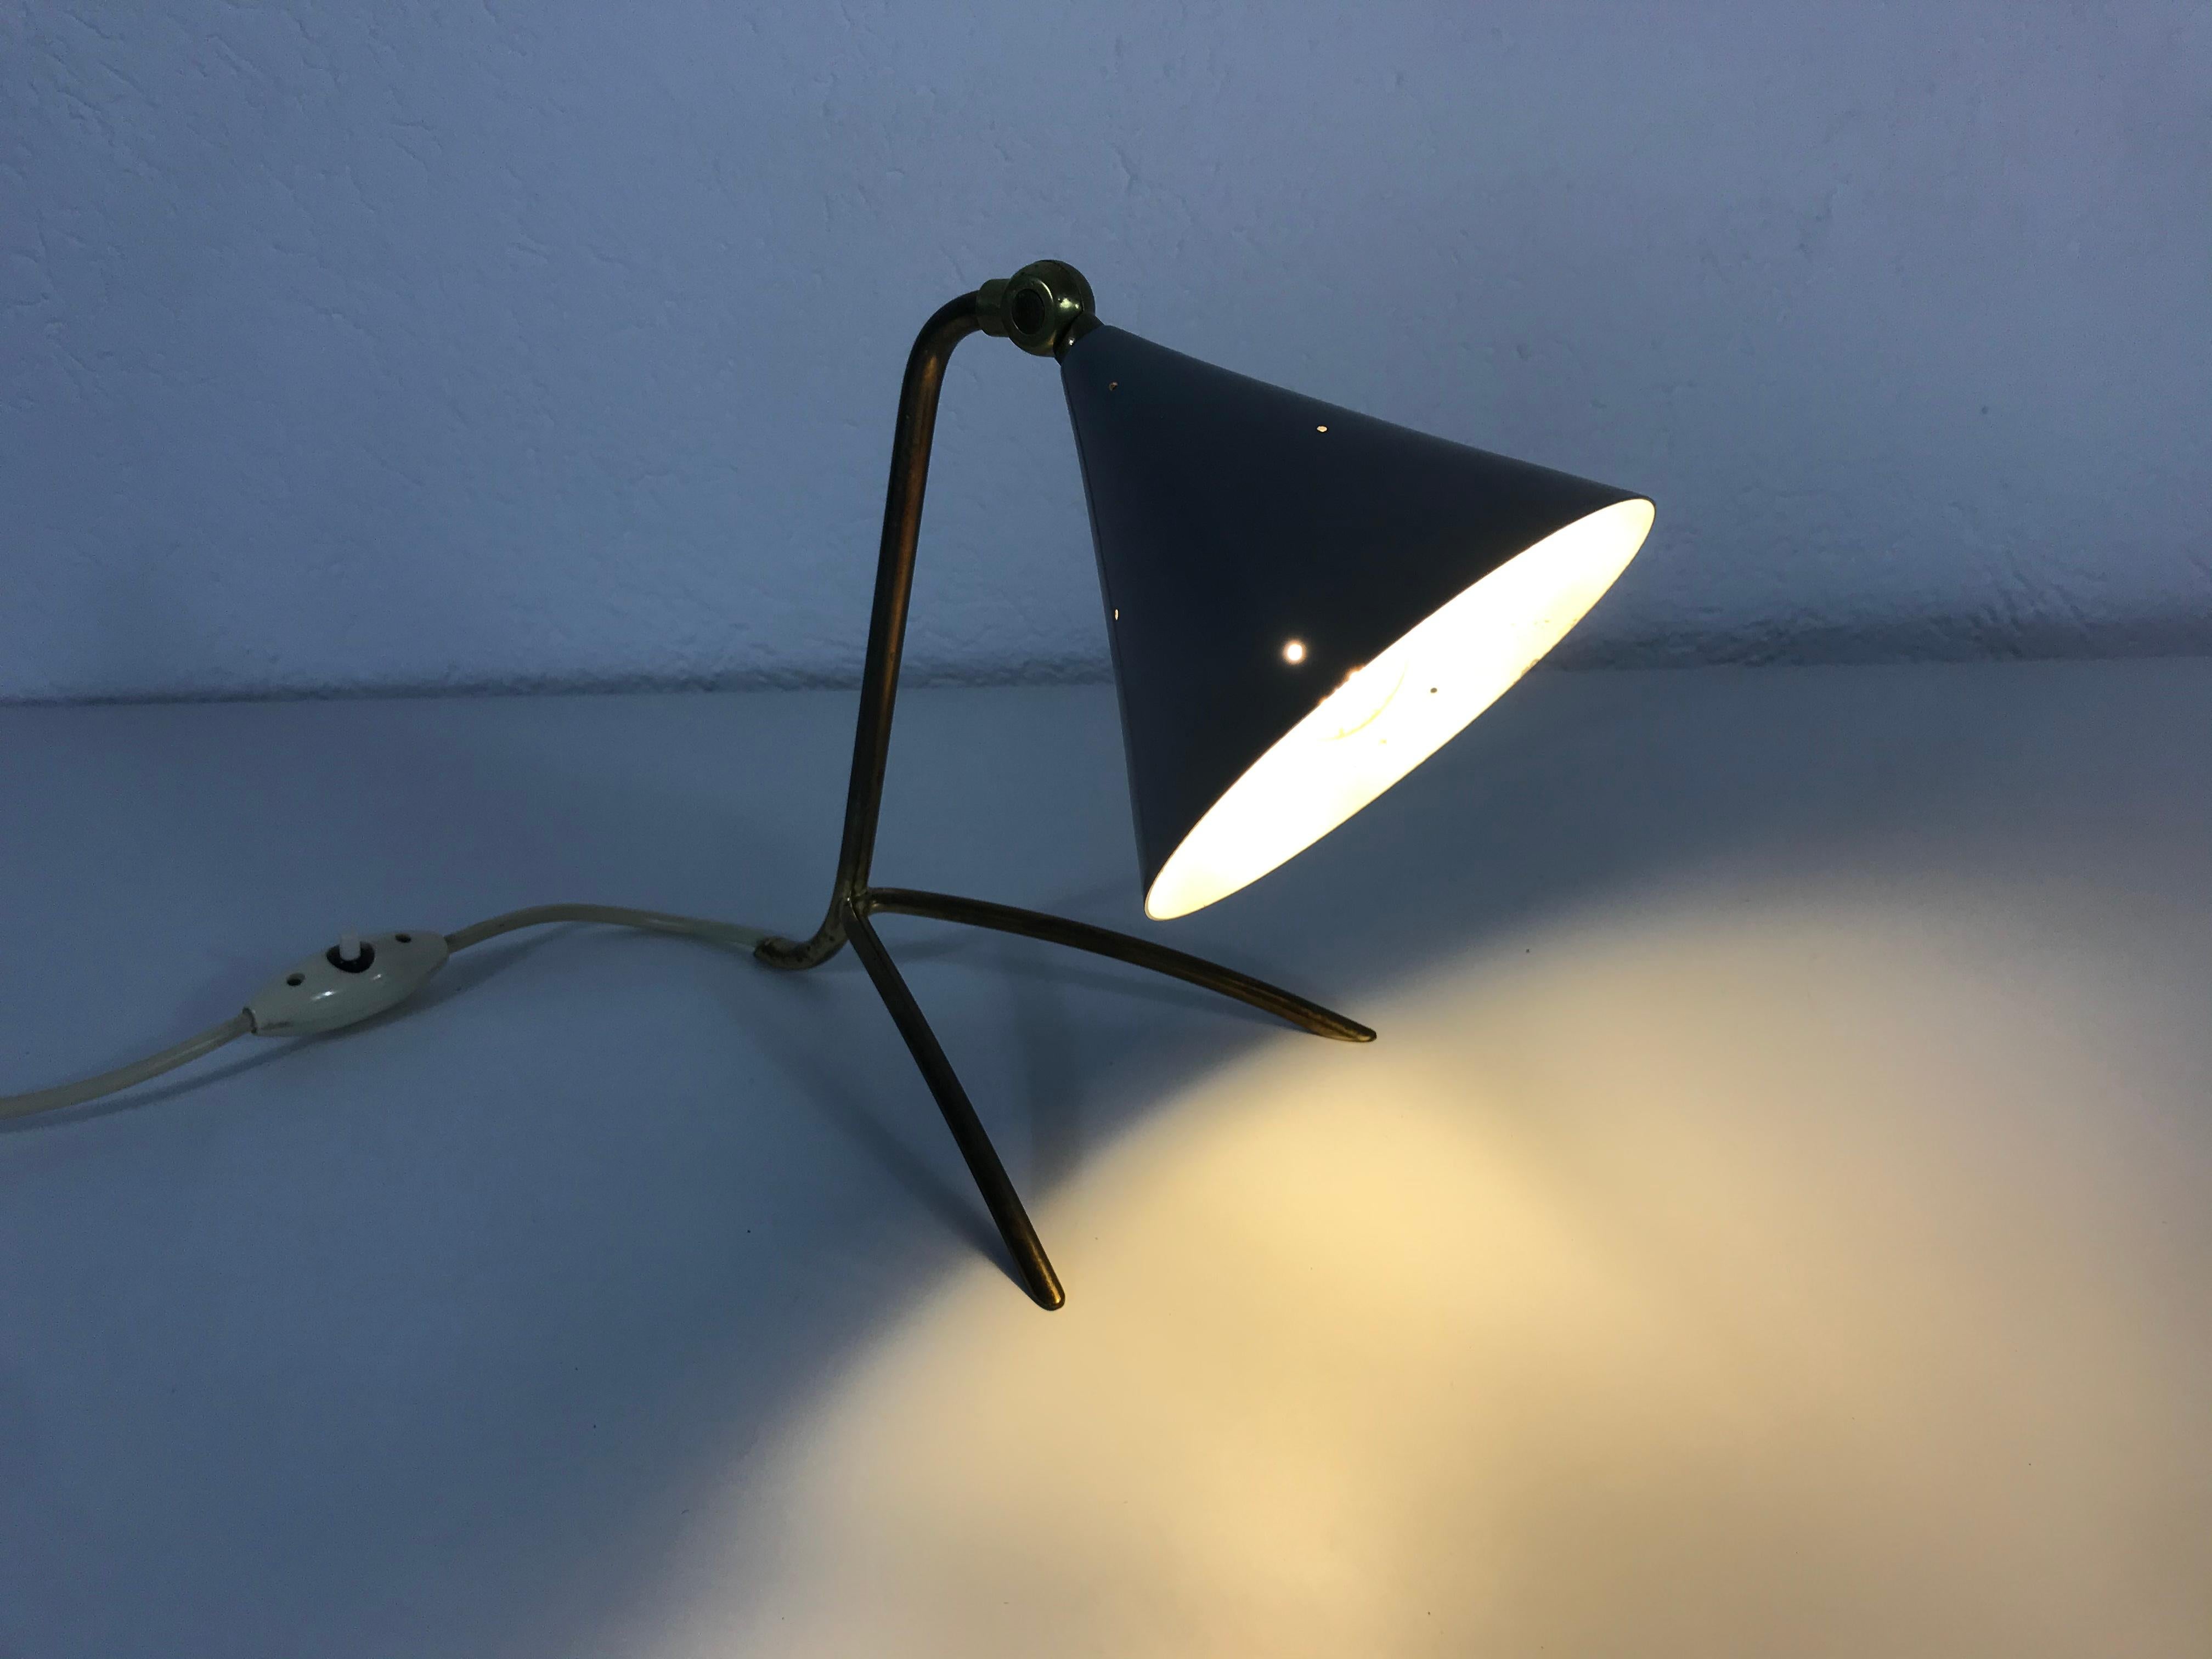 A beautiful table lamp made in the 1950s. It has a brass ball in the centre. The body and the three legs are made of brass. The lamp shade has a blue color and a shape of a cone. The table lamp has an beautiful Italian design.

The light requires